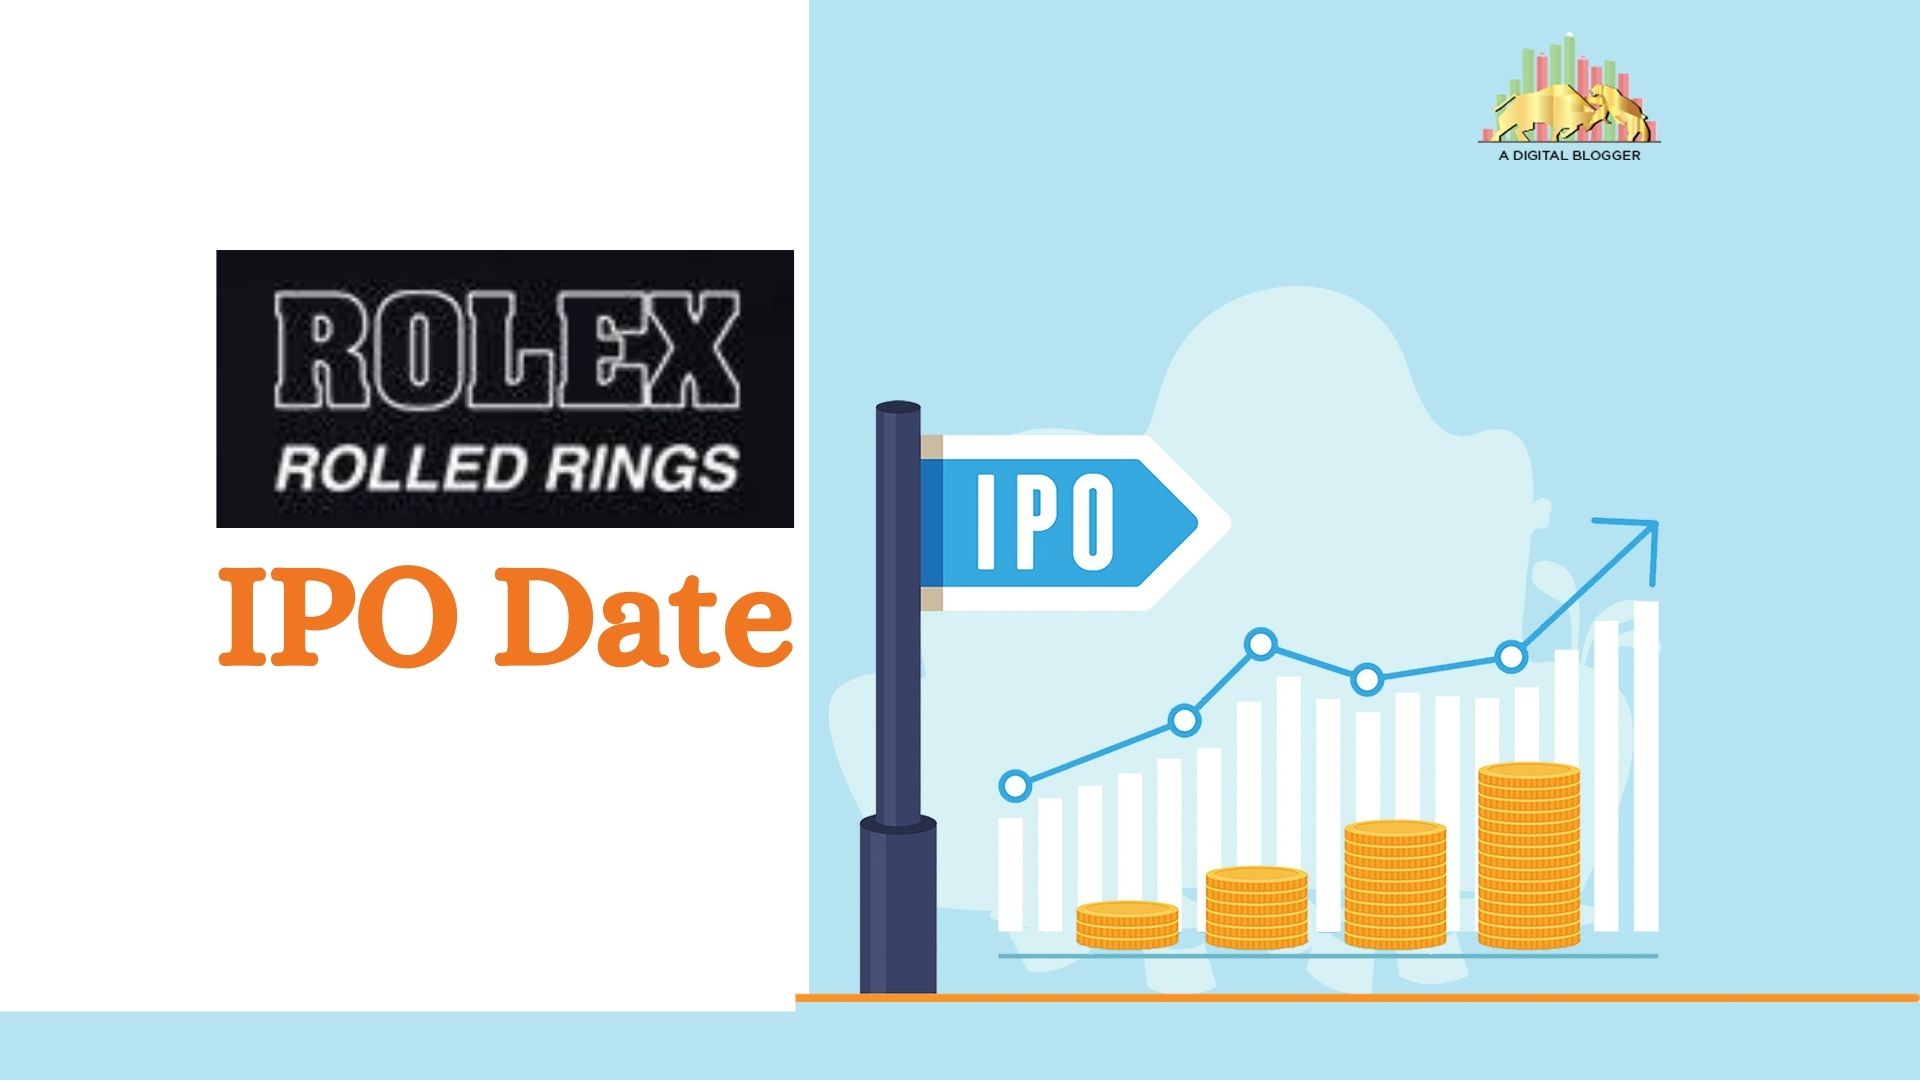 Rolex Rings IPO GMP Price Review Date Subscription Allotment